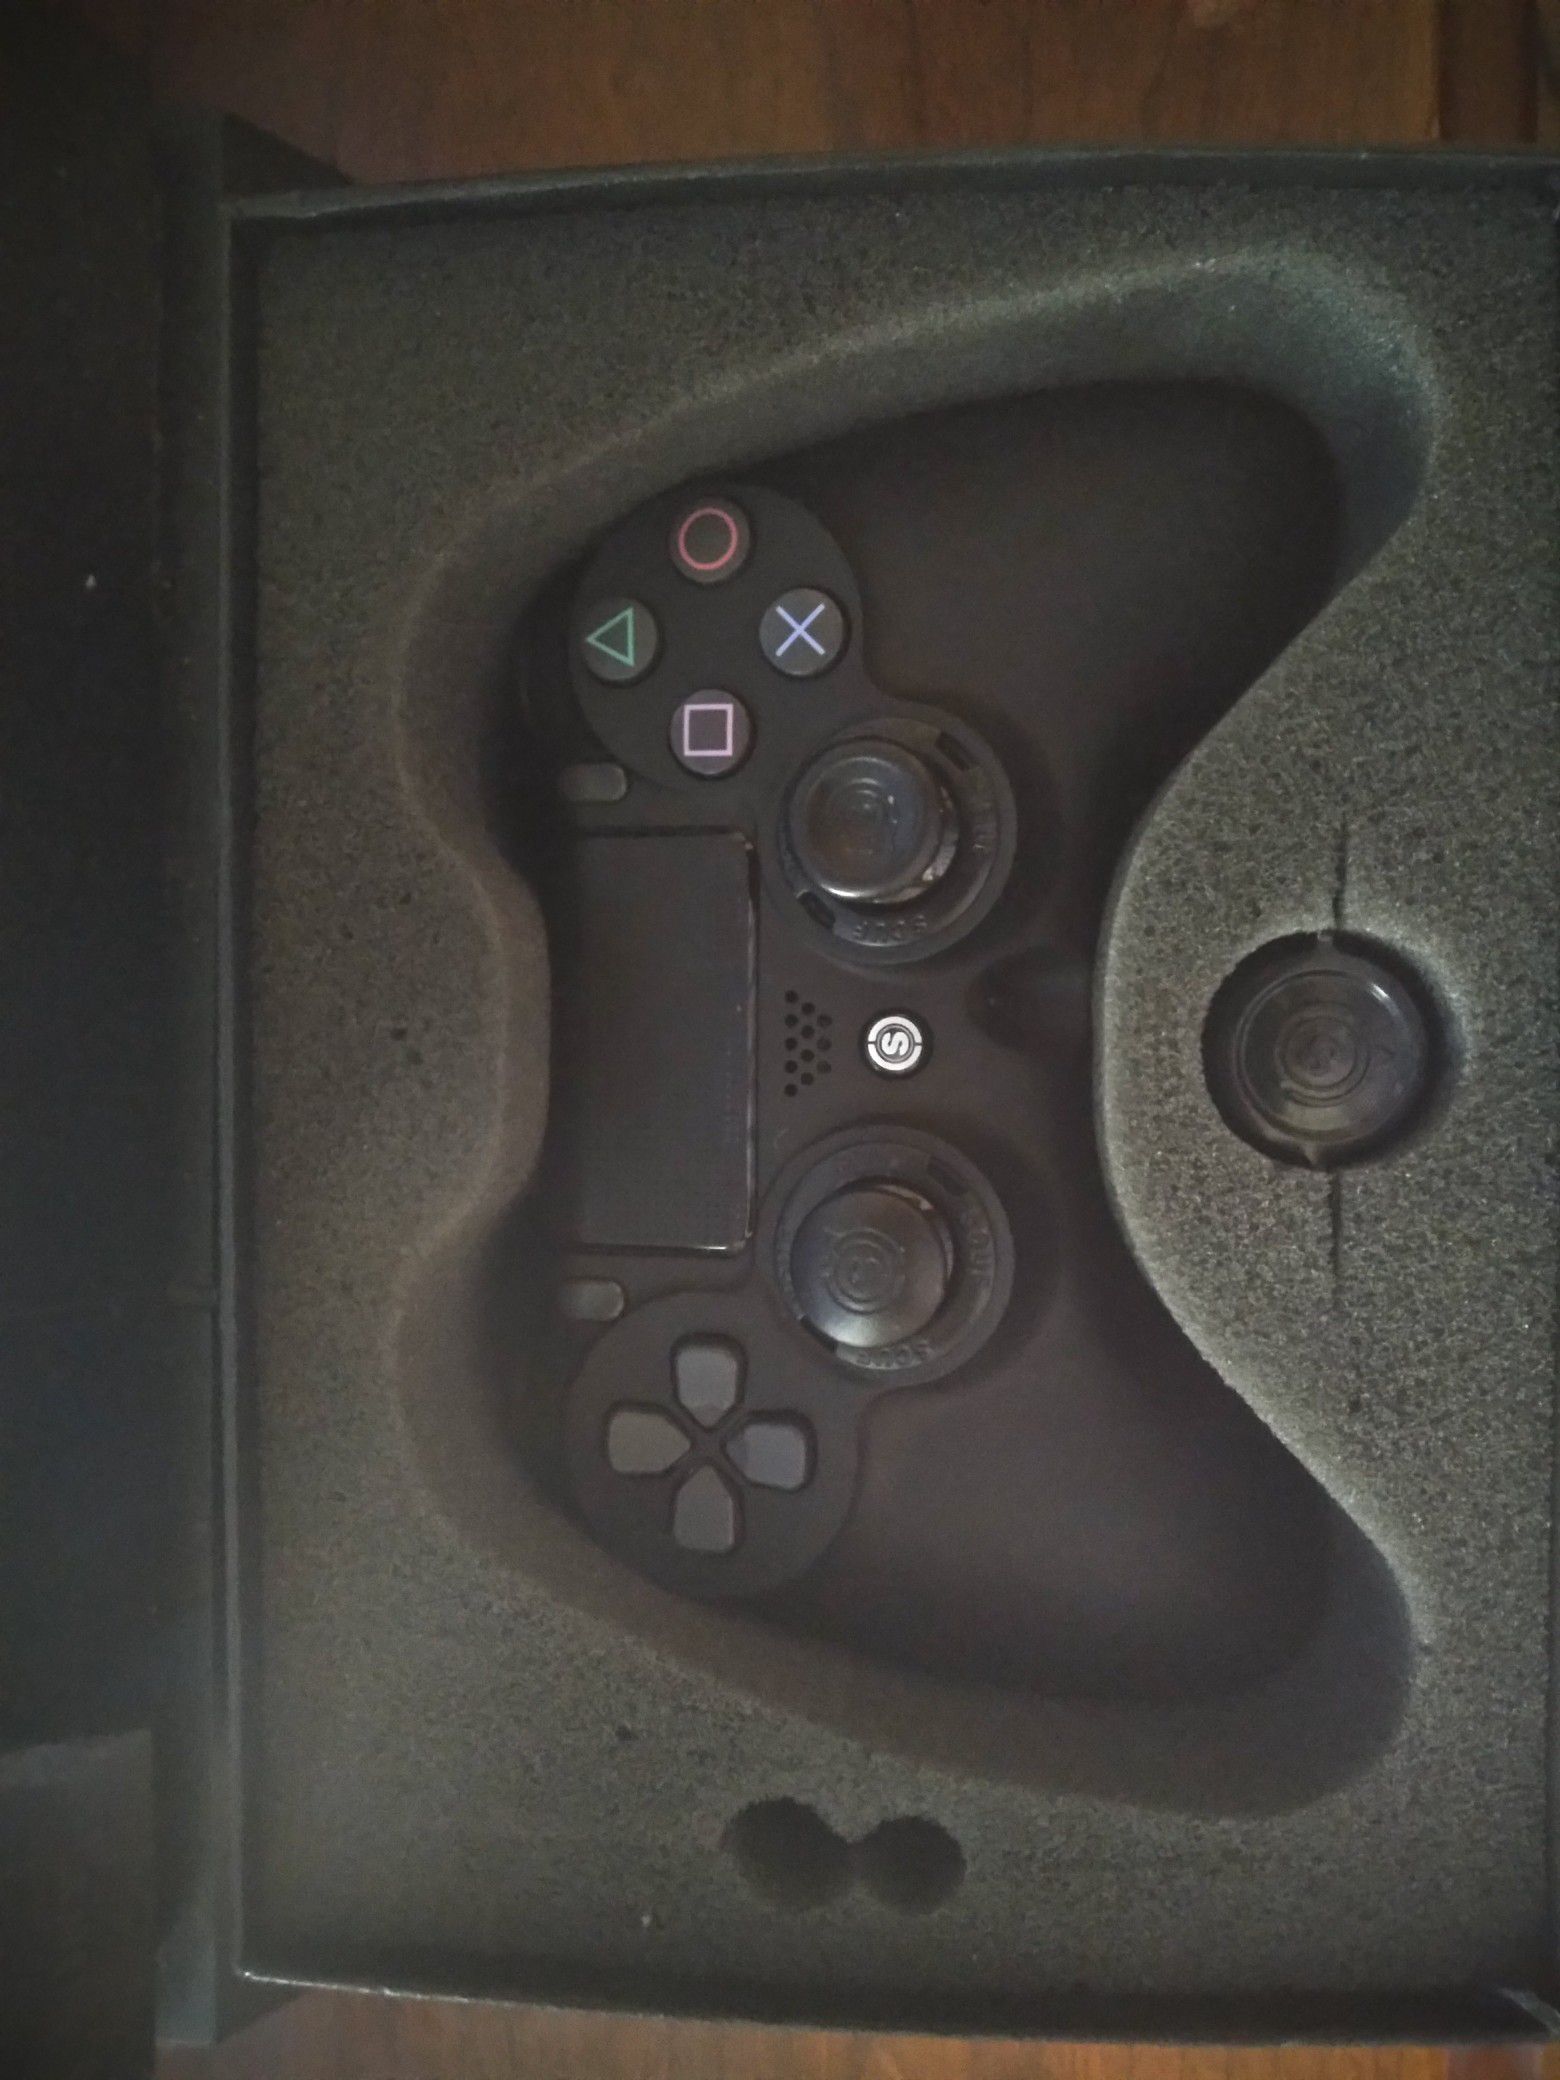 Scuff Impact Gaming Controller for PS4 or PC asking $150 OBO.